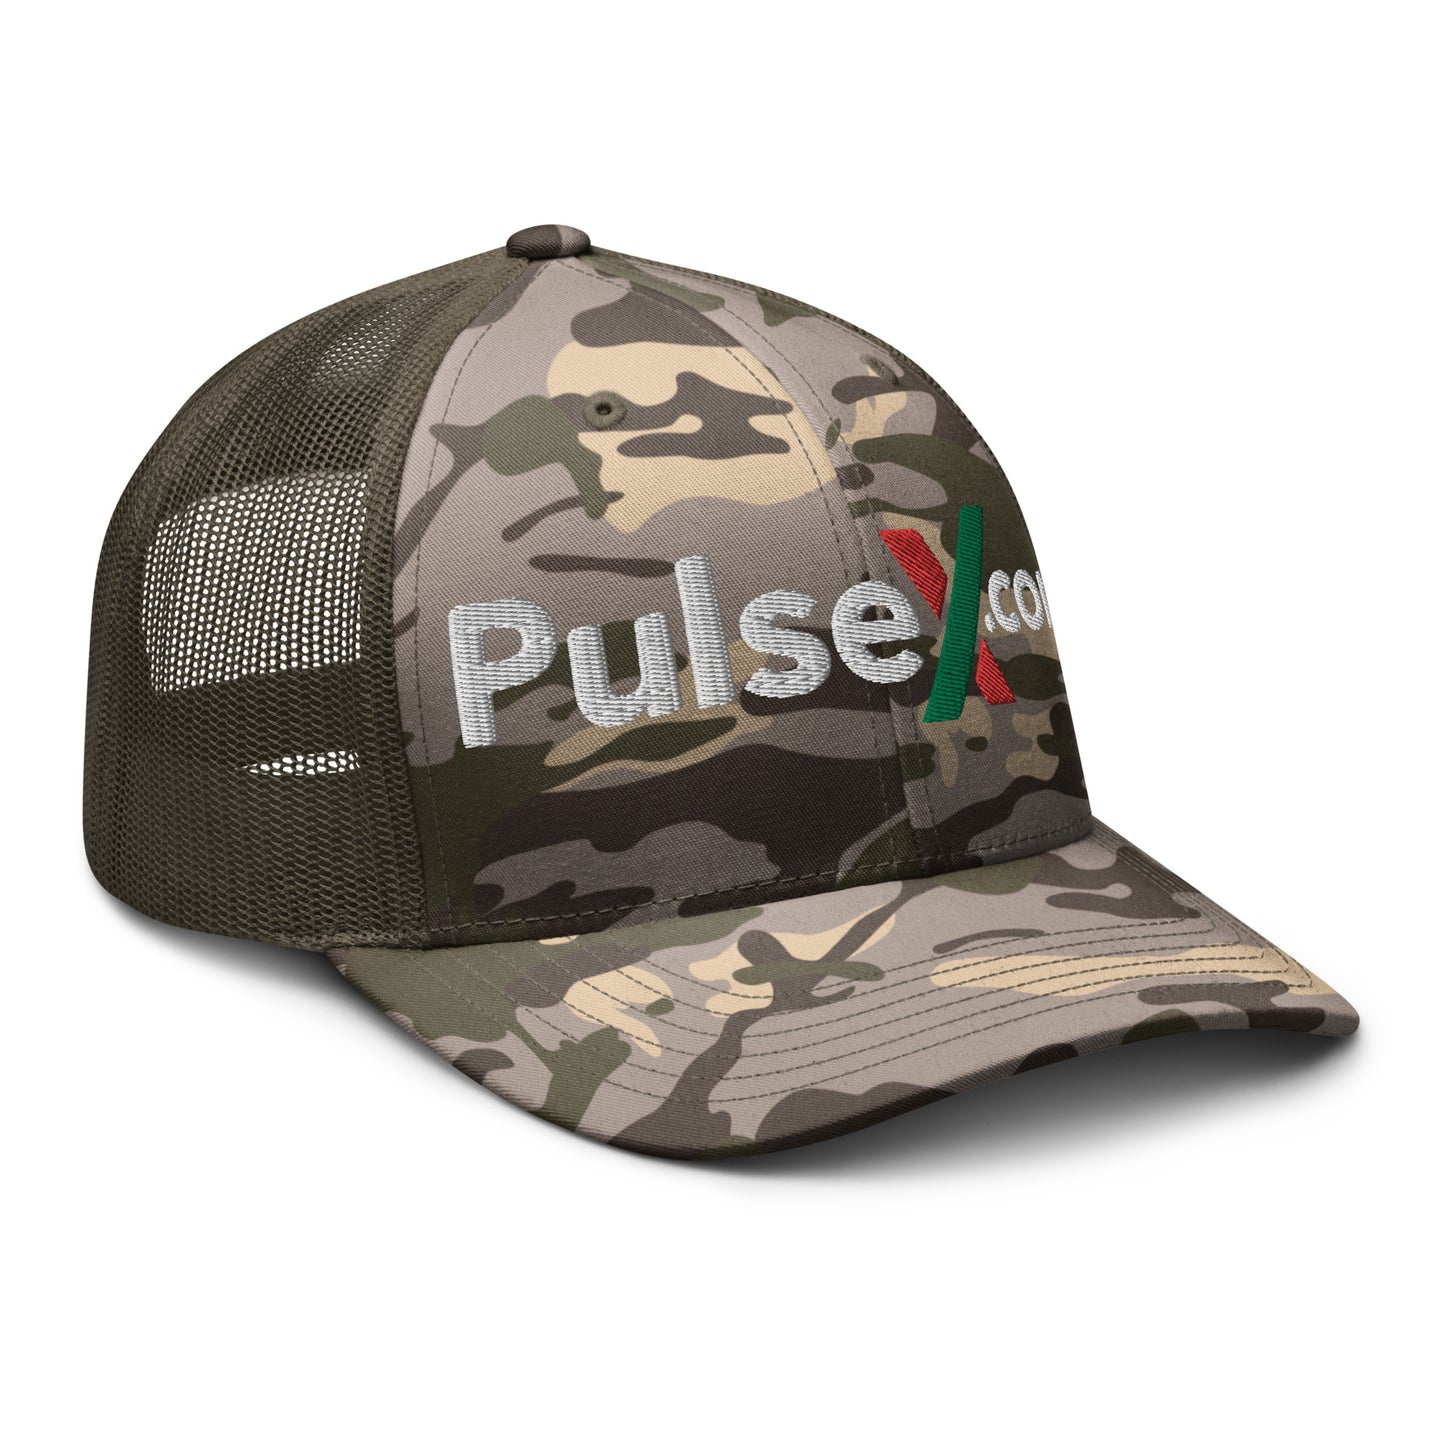 PulseX.com Camouflage Trucker Hat (Embroidered)